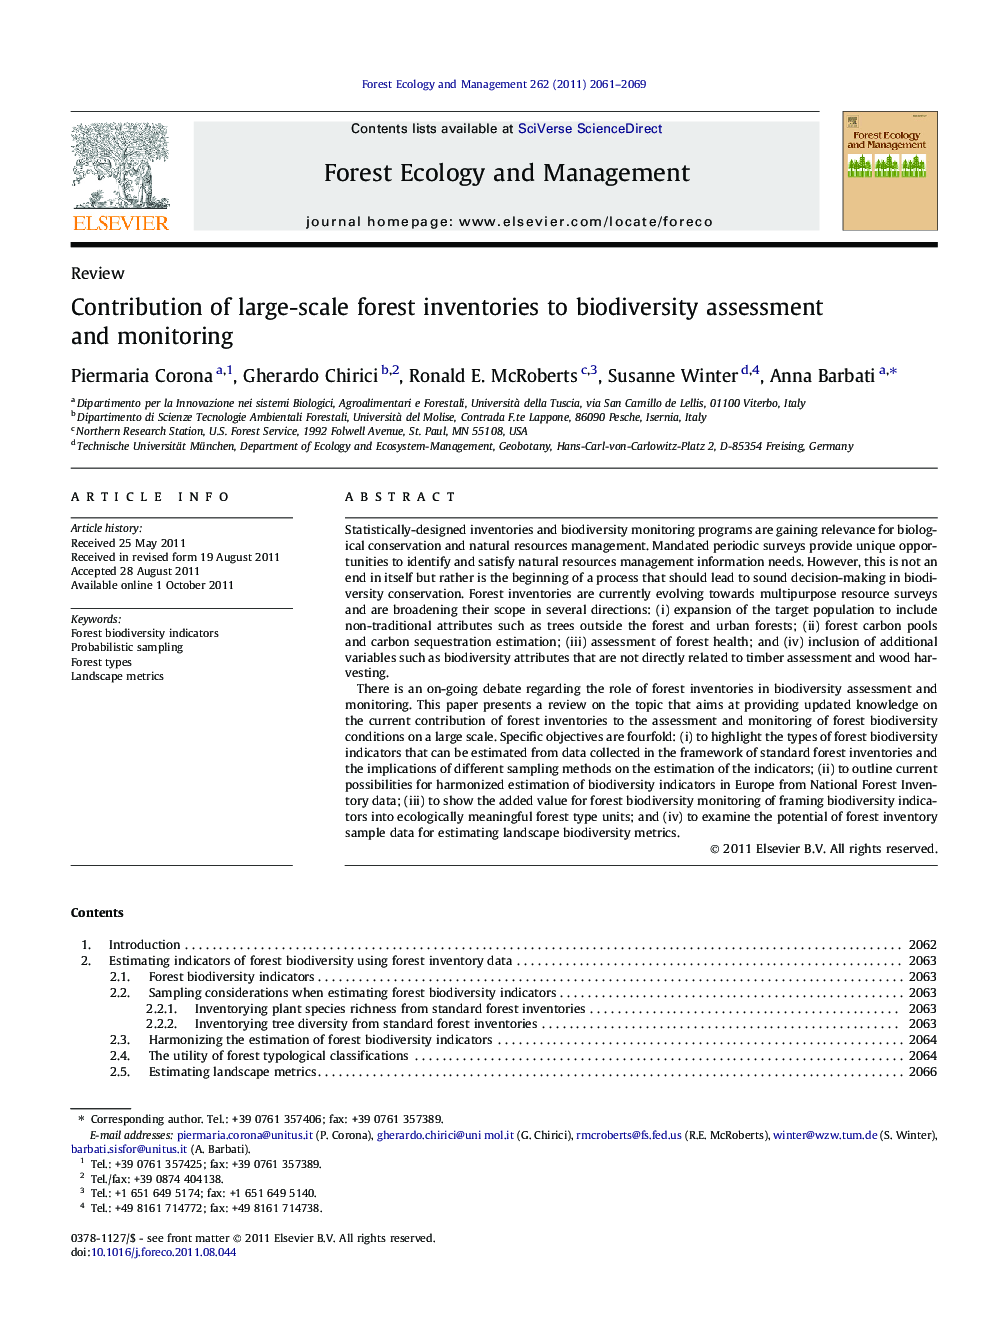 Contribution of large-scale forest inventories to biodiversity assessment and monitoring